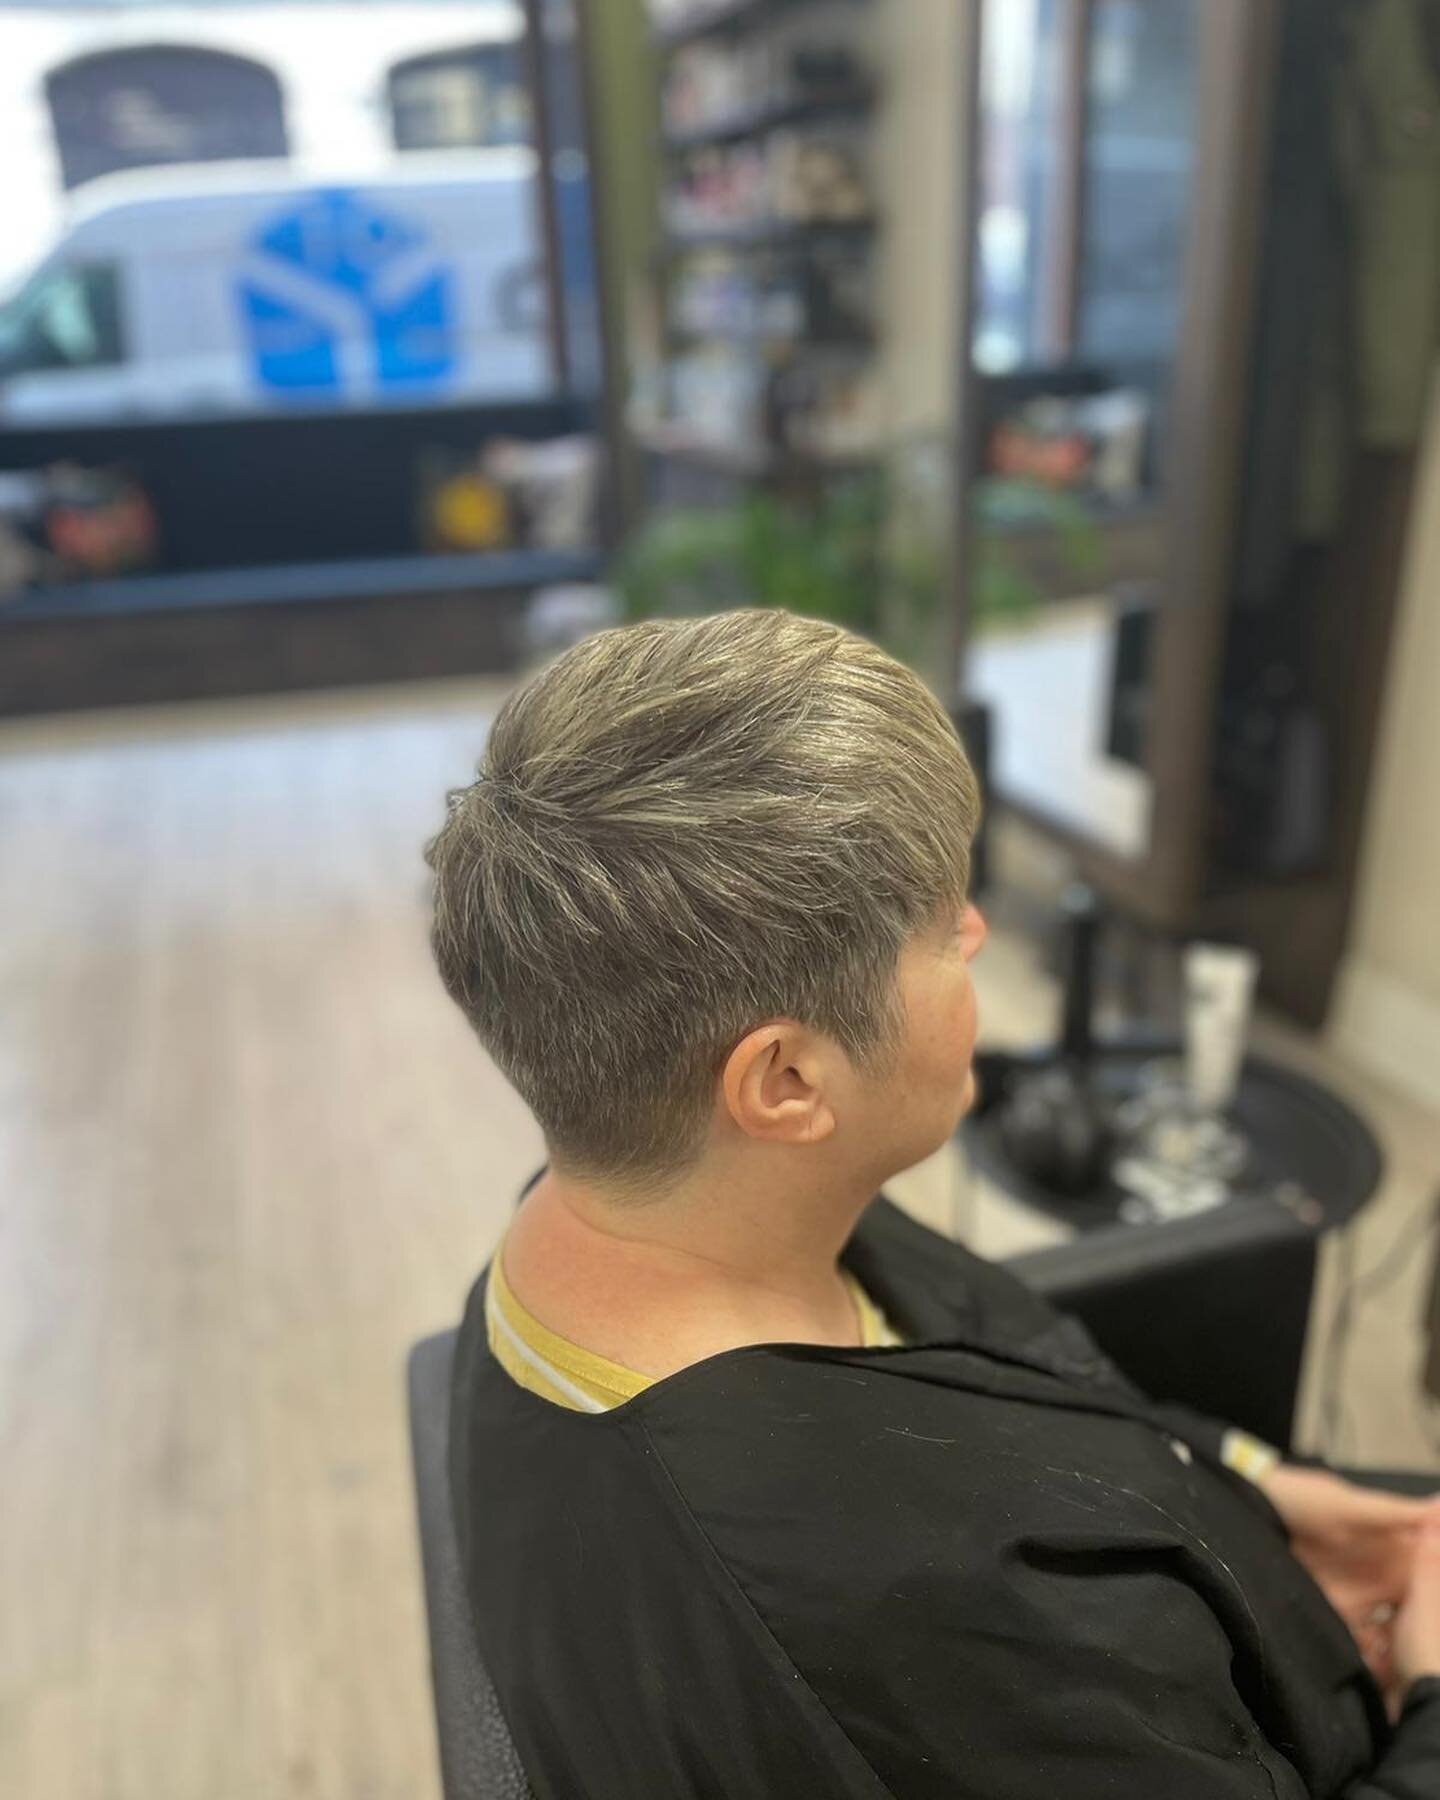 It&rsquo;s a new week for the Dot Hair team 💪

You may want to update your look, get advice from the Dot Hair experts or change your look completely. 

We&rsquo;ll be there every step of the way ✅

Book your appointment this week 👇

📱 0151 236 542